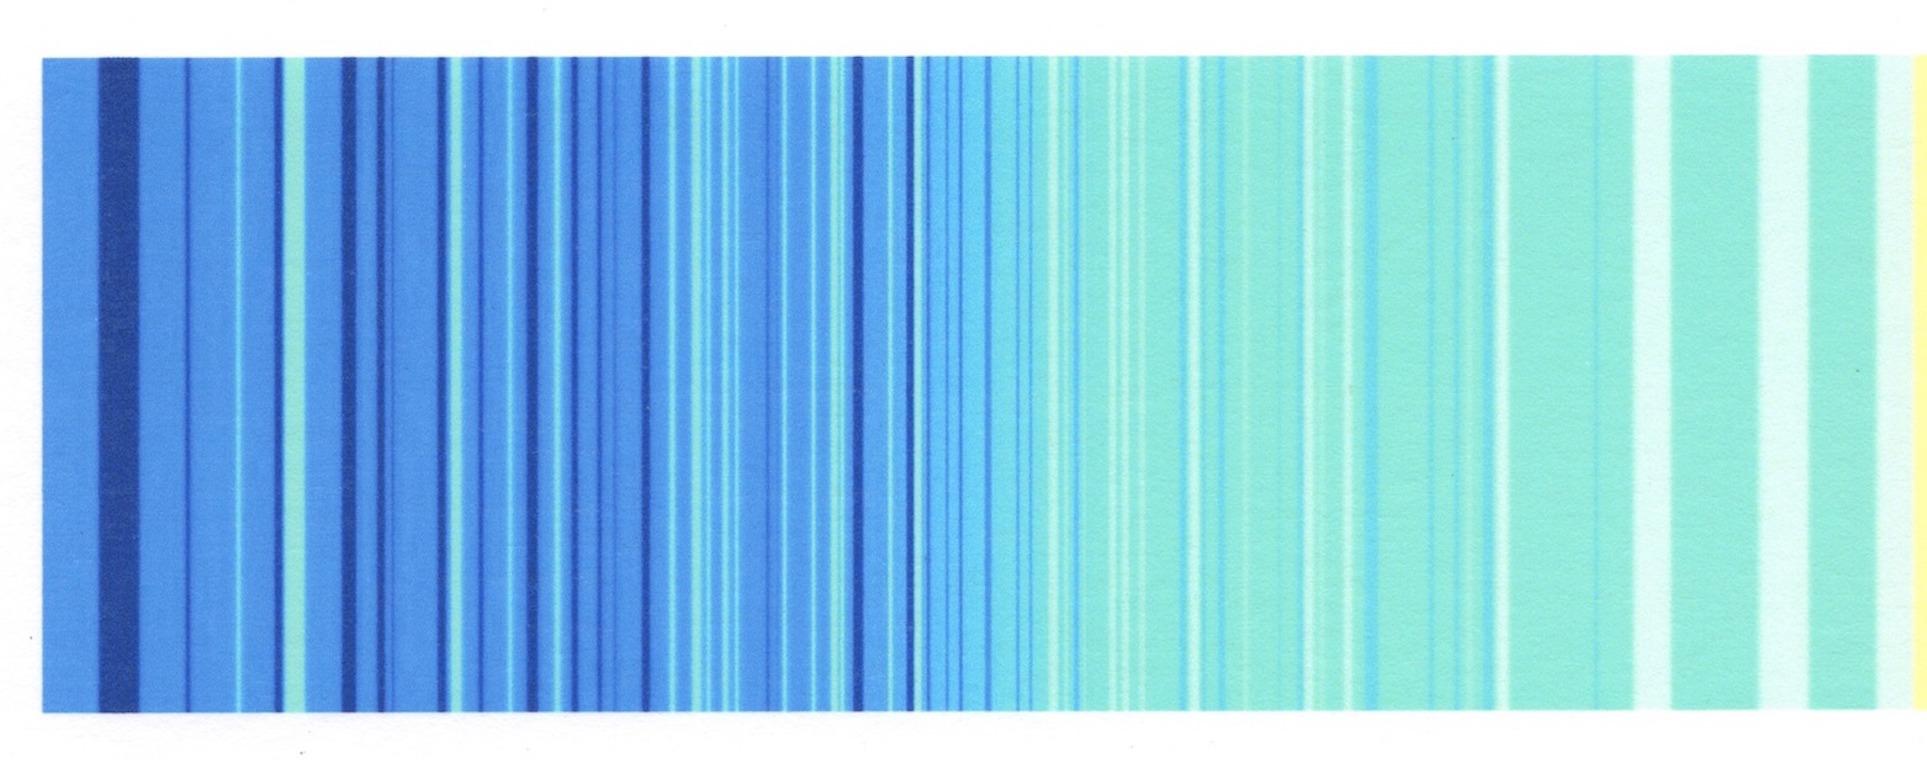 Patty deGrandpre’s “The Complements 1” is a unique abstract 1.75 x 10 inch polychromatic inkjet print on 11 x 14 inch rag paper with a band of varied stripes in saturated complementary hues of blue and orange that incorporates a picture taken of a